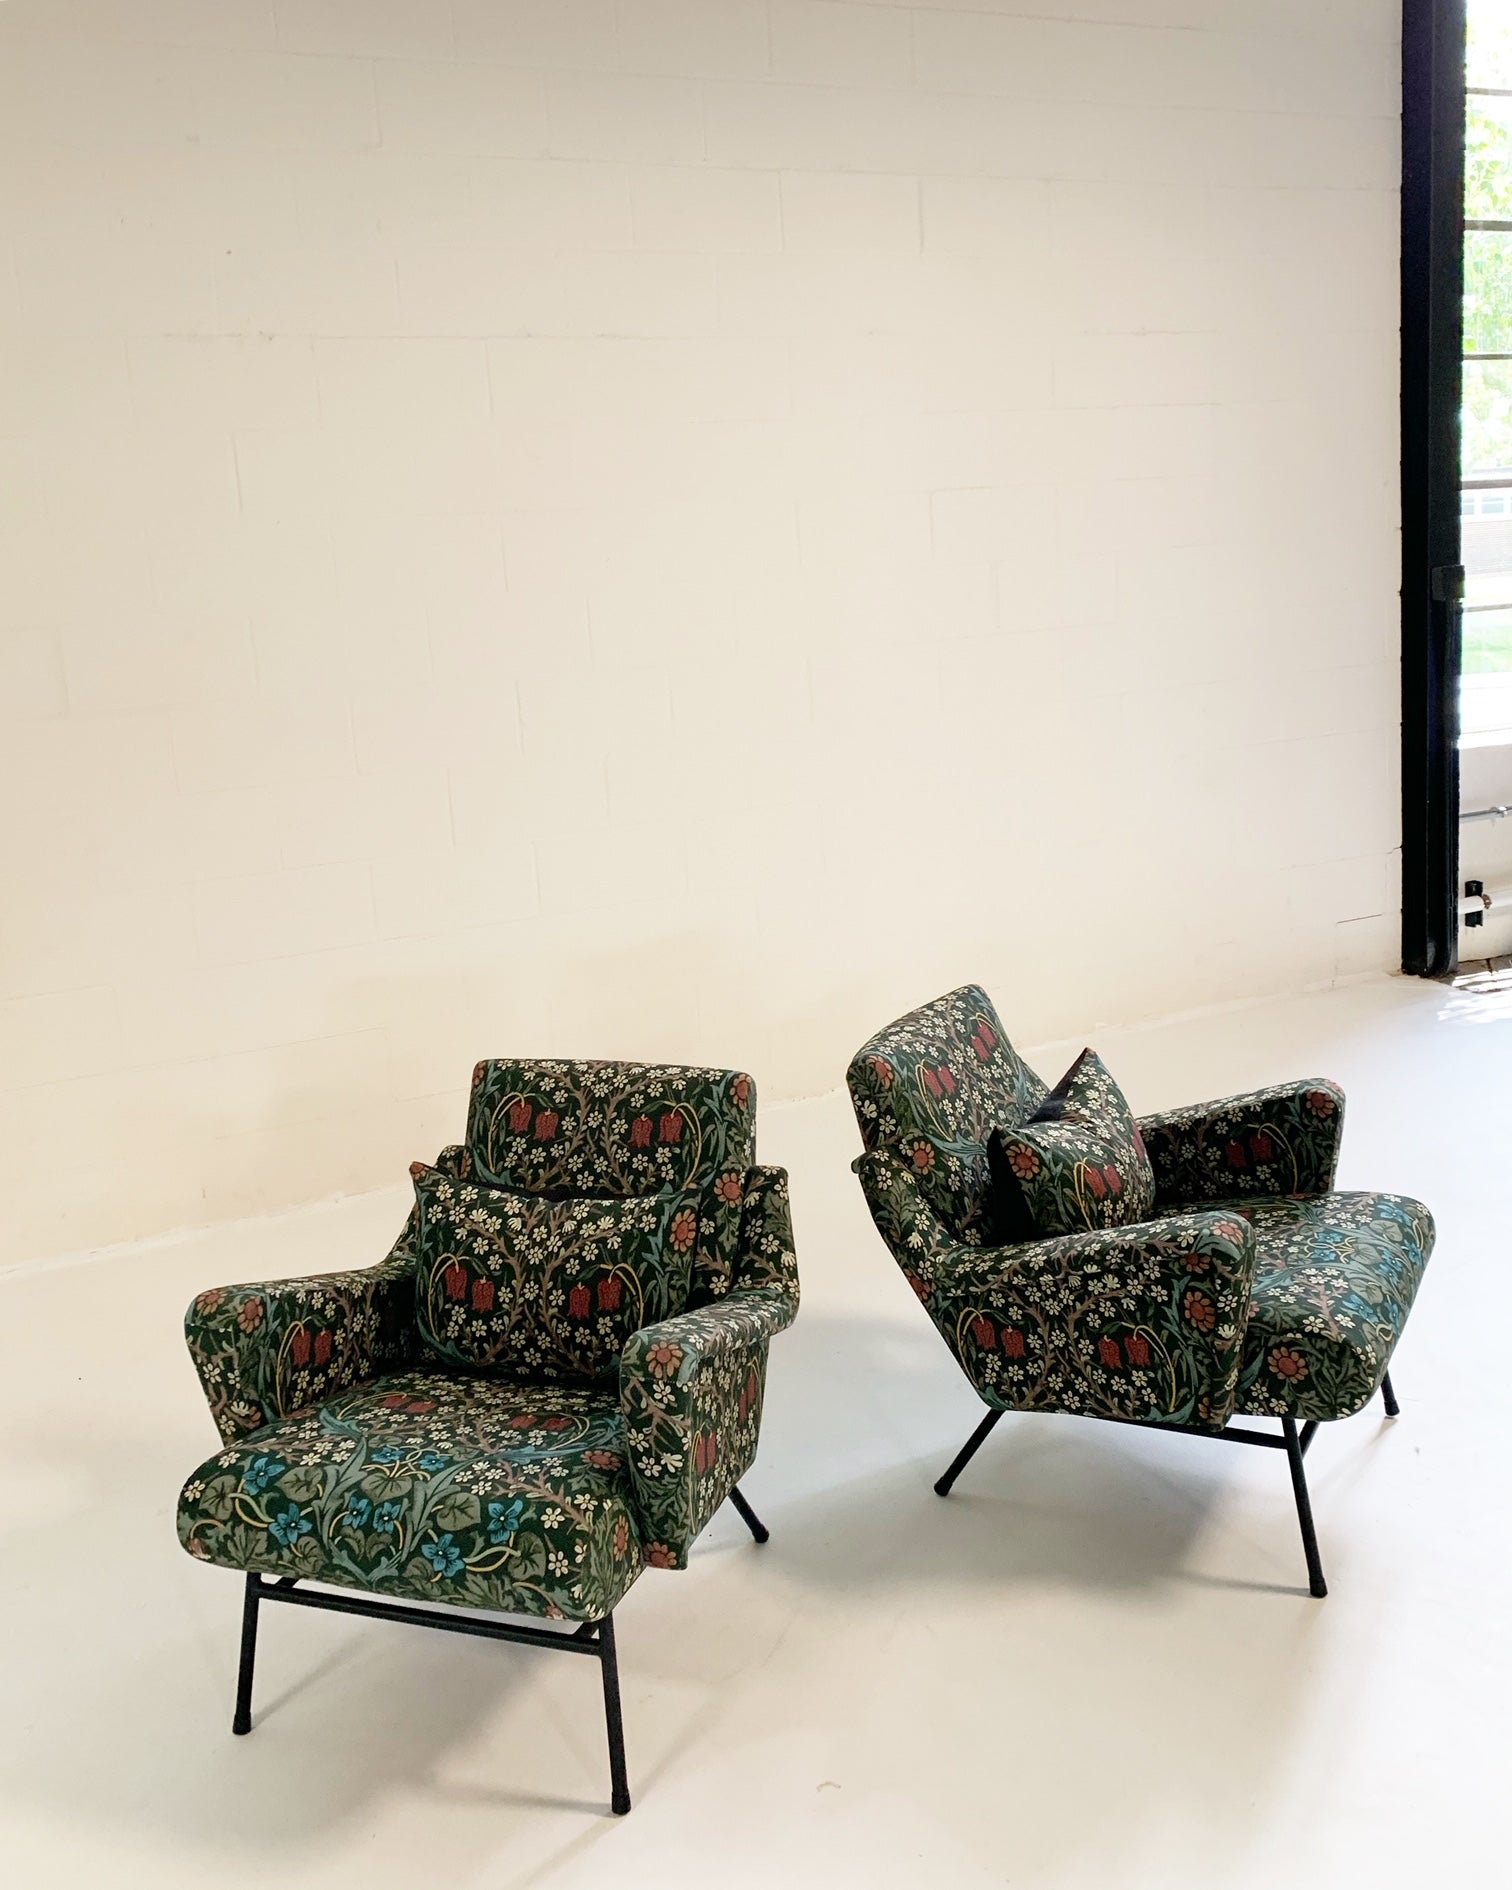 c. 1955 French Lounge Chairs in William Morris Blackthorn, pair - FORSYTH